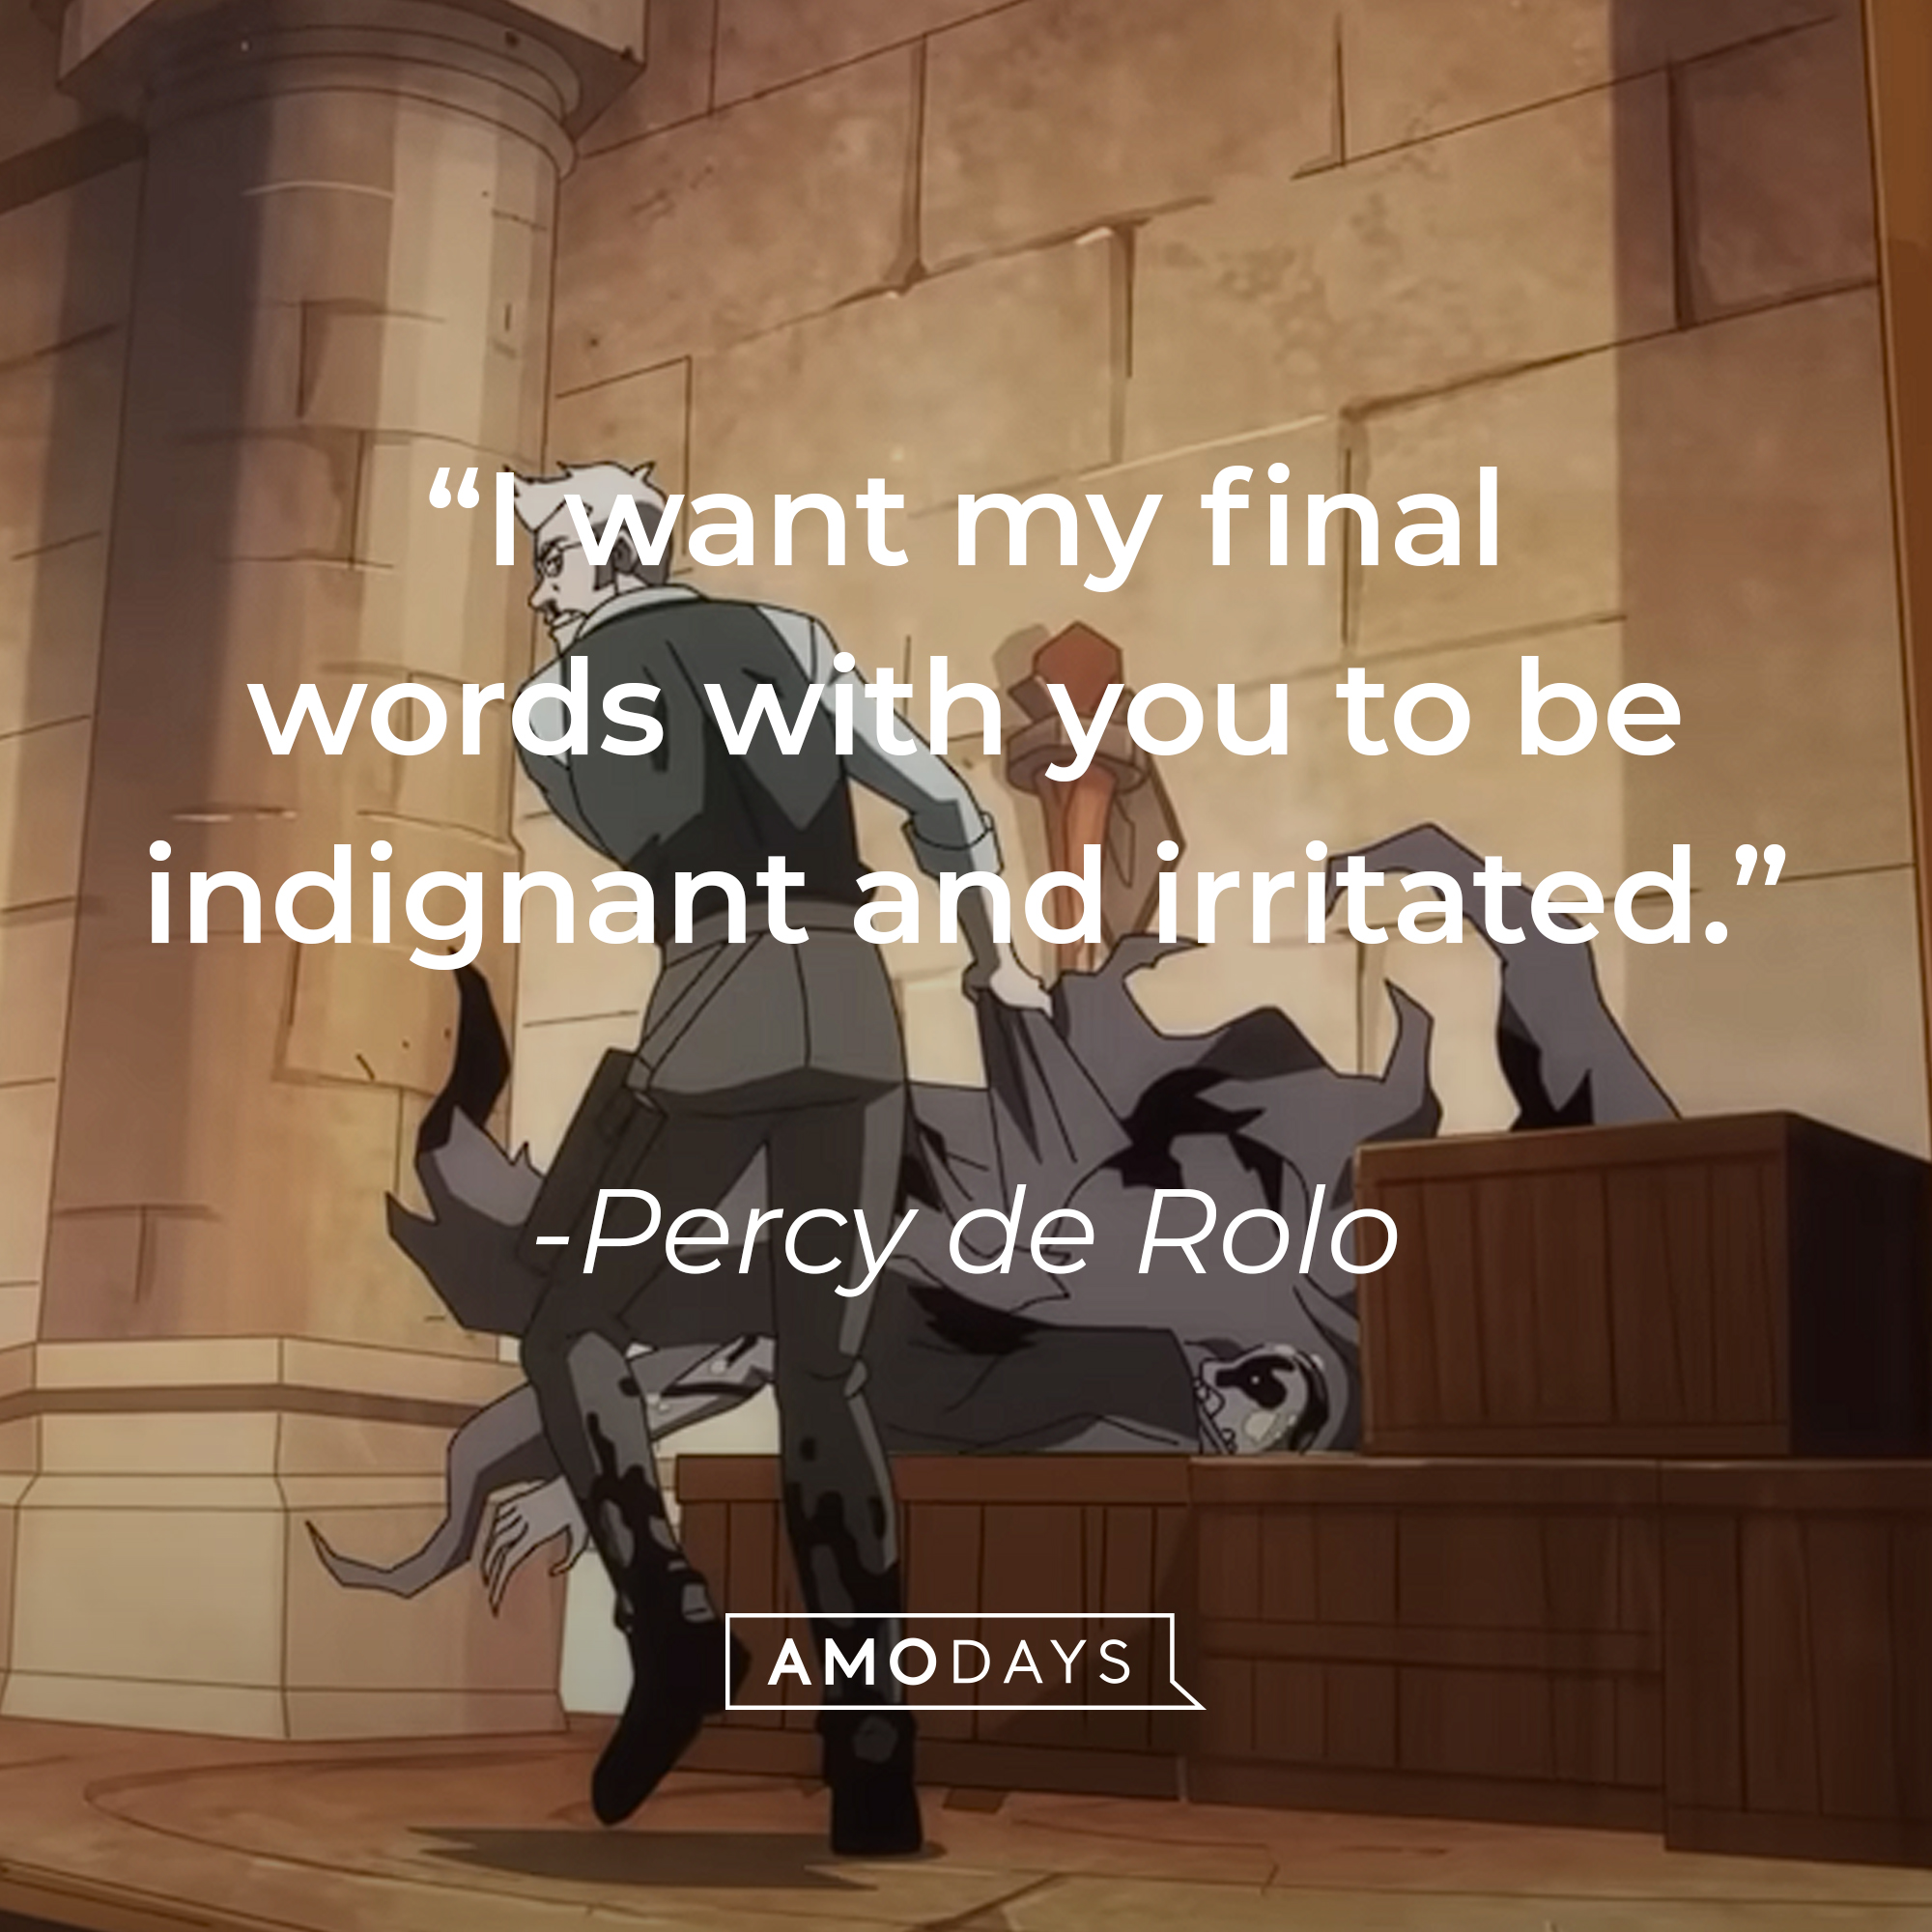 An image of Percy de Rolo with his  quote: “I want my final words with you to be indignant and irritated.” | Source: youtube.com/PrimeVideo